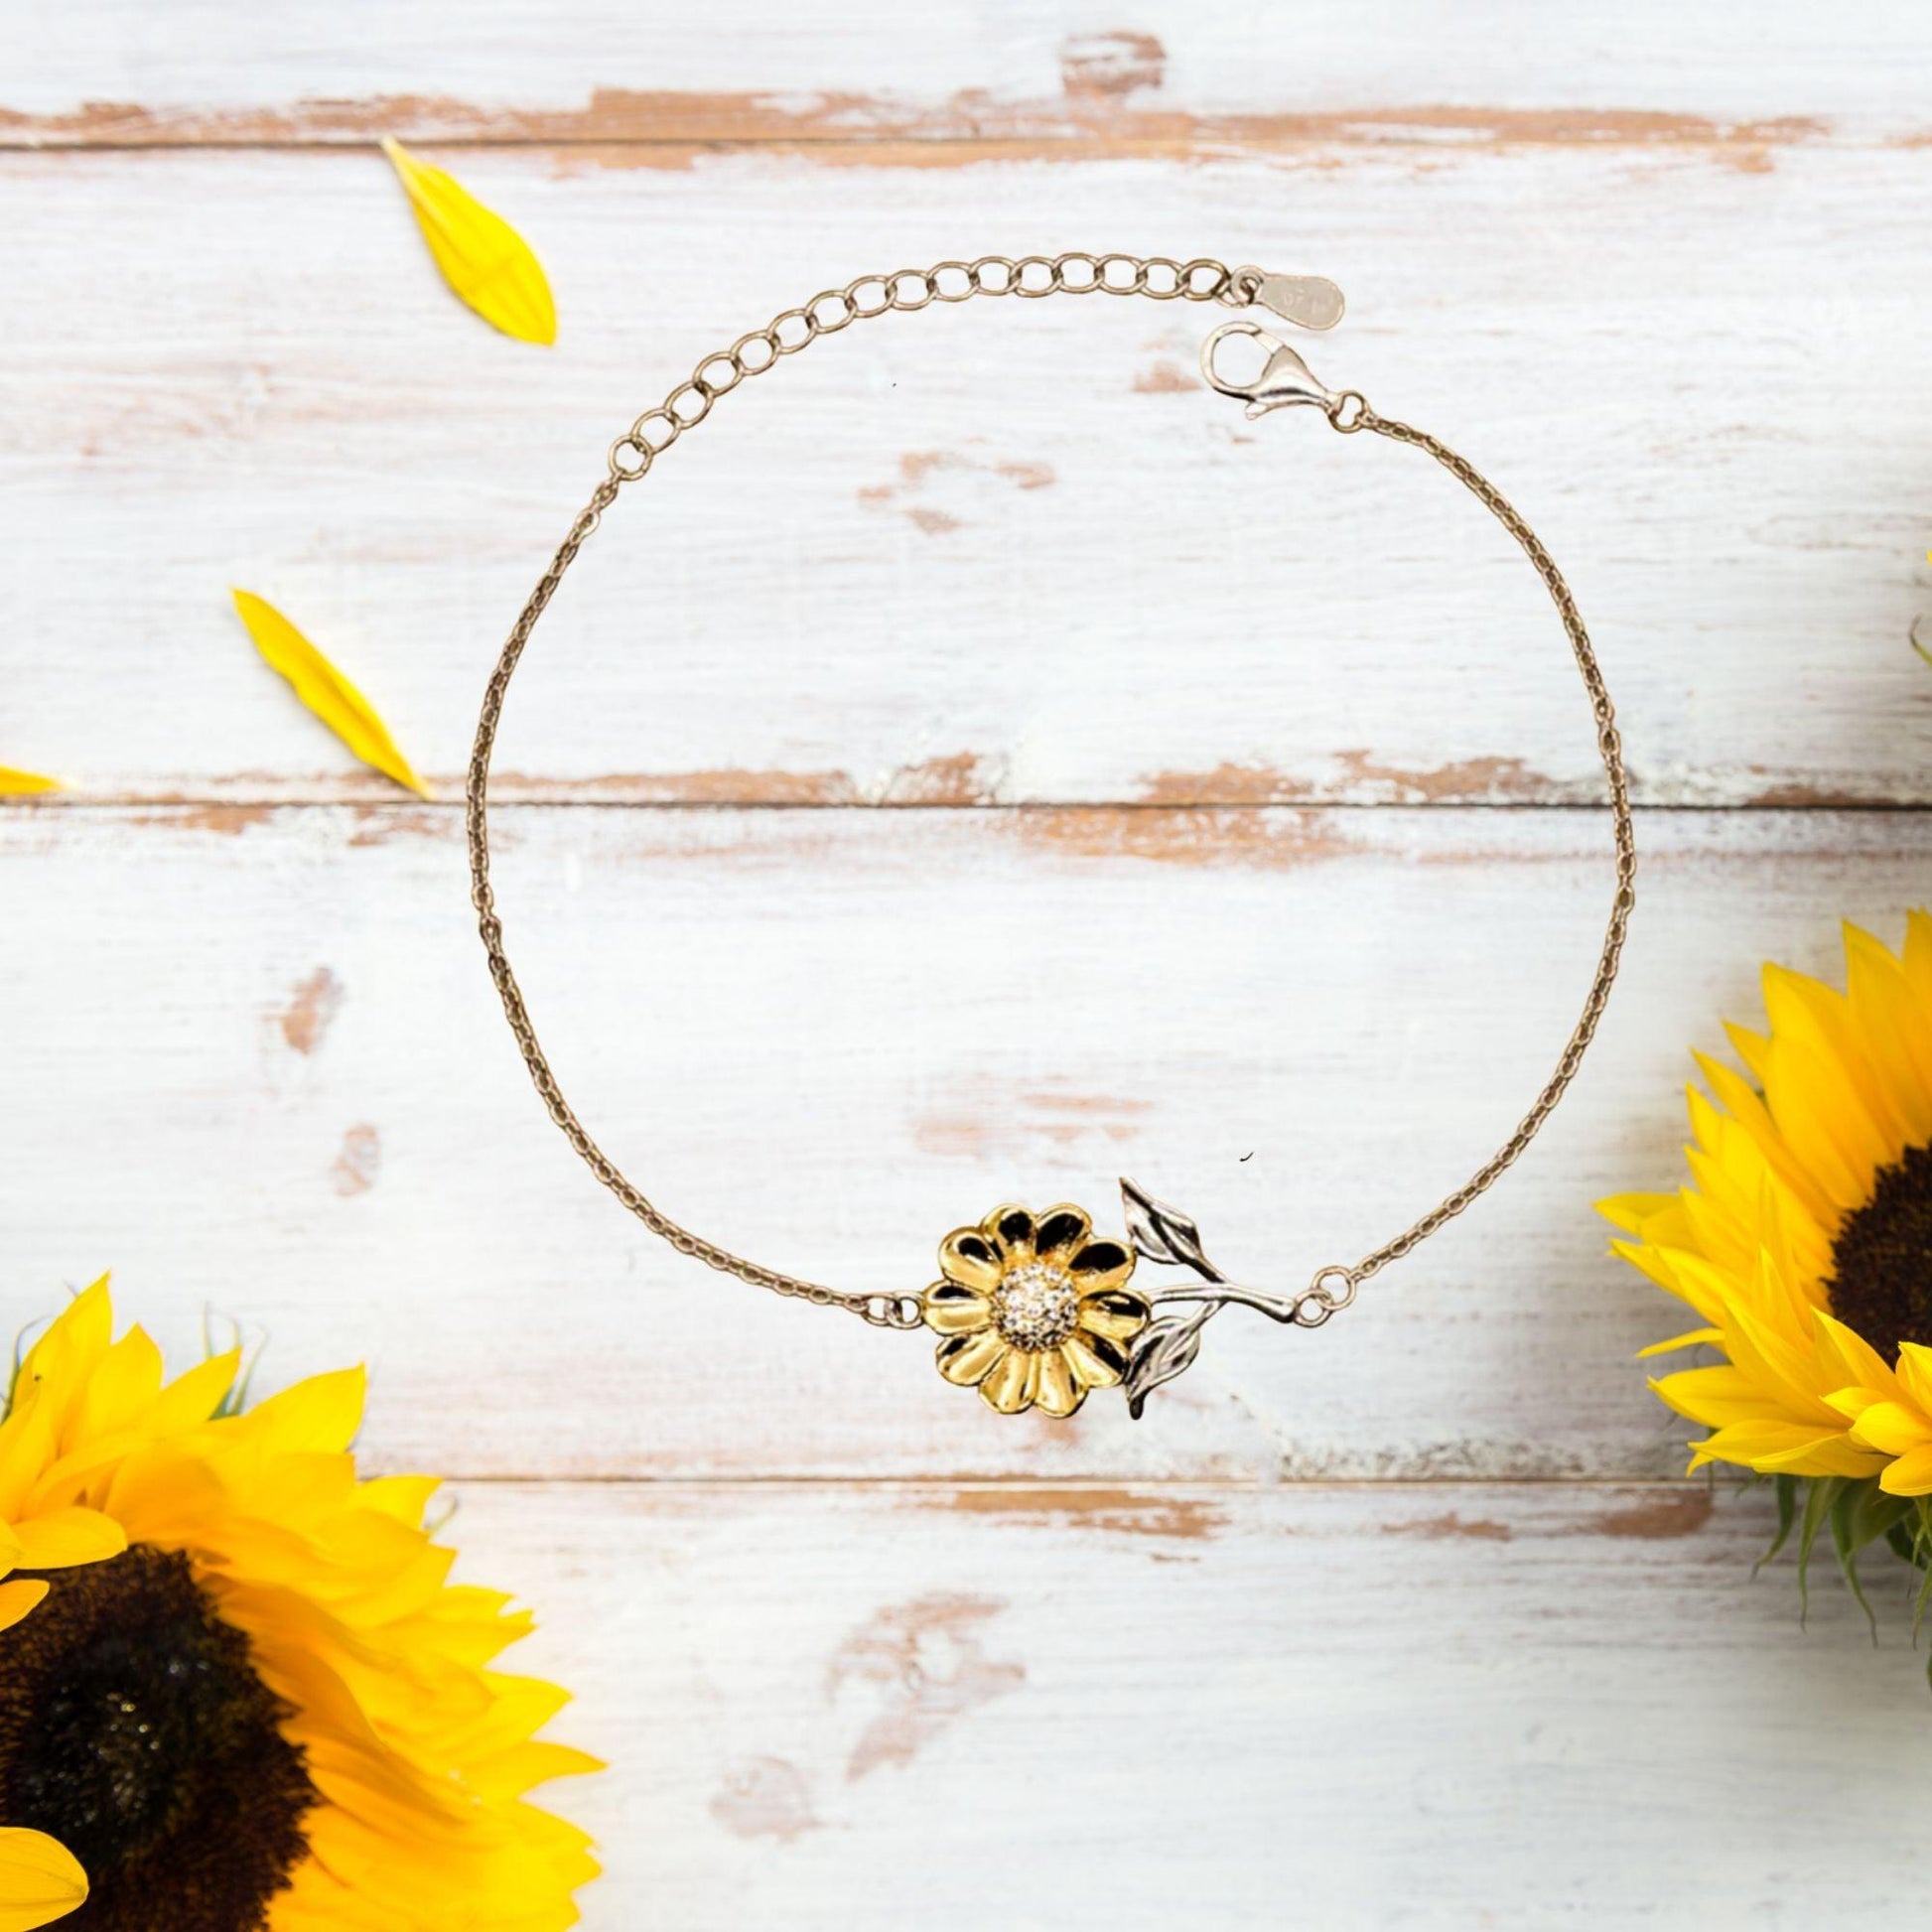 Remarkable Financial Advisor Gifts, Your dedication and hard work, Inspirational Birthday Christmas Unique Sunflower Bracelet For Financial Advisor, Coworkers, Men, Women, Friends - Mallard Moon Gift Shop